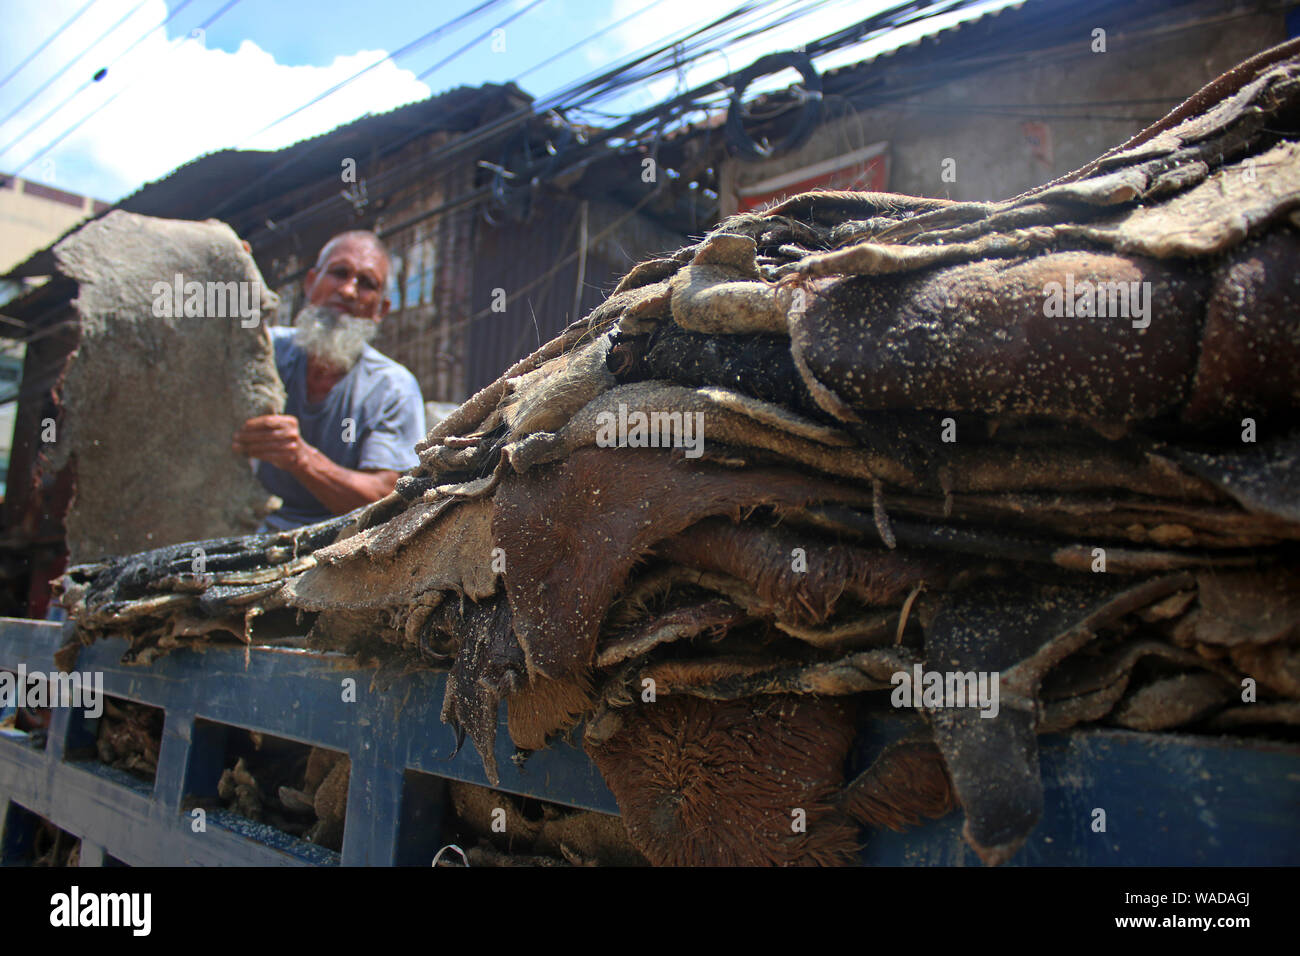 Dhaka, Bangladesh. 18th Aug, 2019. A Worker loads rawhide of the sacrificial animals on a truck at the Posta area in Dhaka.In the post-Eid few days, it has been a common scenario that traders at Posta area, which is known as wholesale market for rawhide, are busy processing rawhide by rubbing salt. Not only the rawhide traders but tanners are also busy buying rawhide from the wholesalers during Eid-ul-Azha. Credit: SOPA Images Limited/Alamy Live News Stock Photo